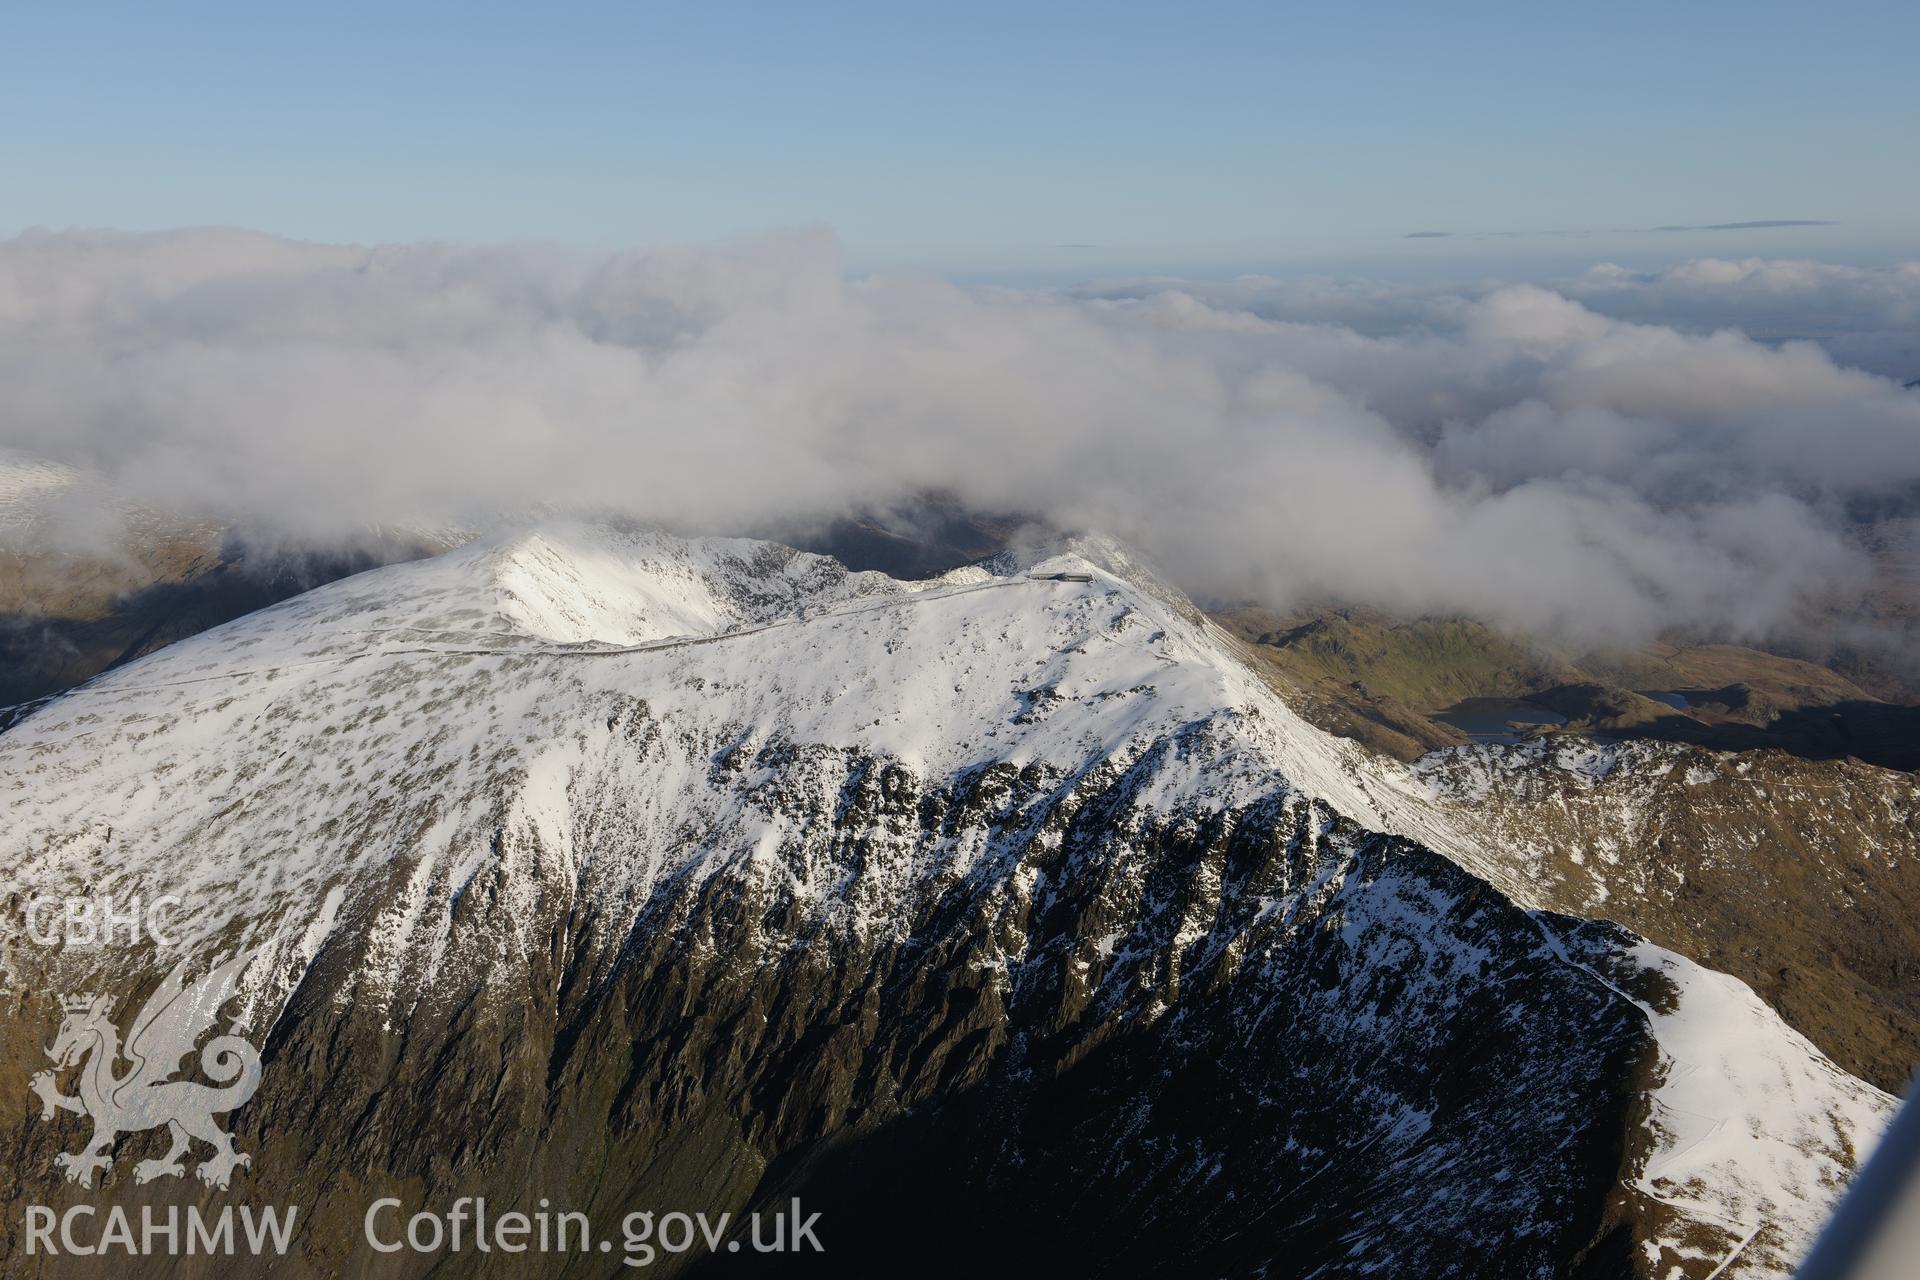 RCAHMW colour oblique photograph of Snowdon summit under snow, view from the west. Taken by Toby Driver on 10/12/2012.